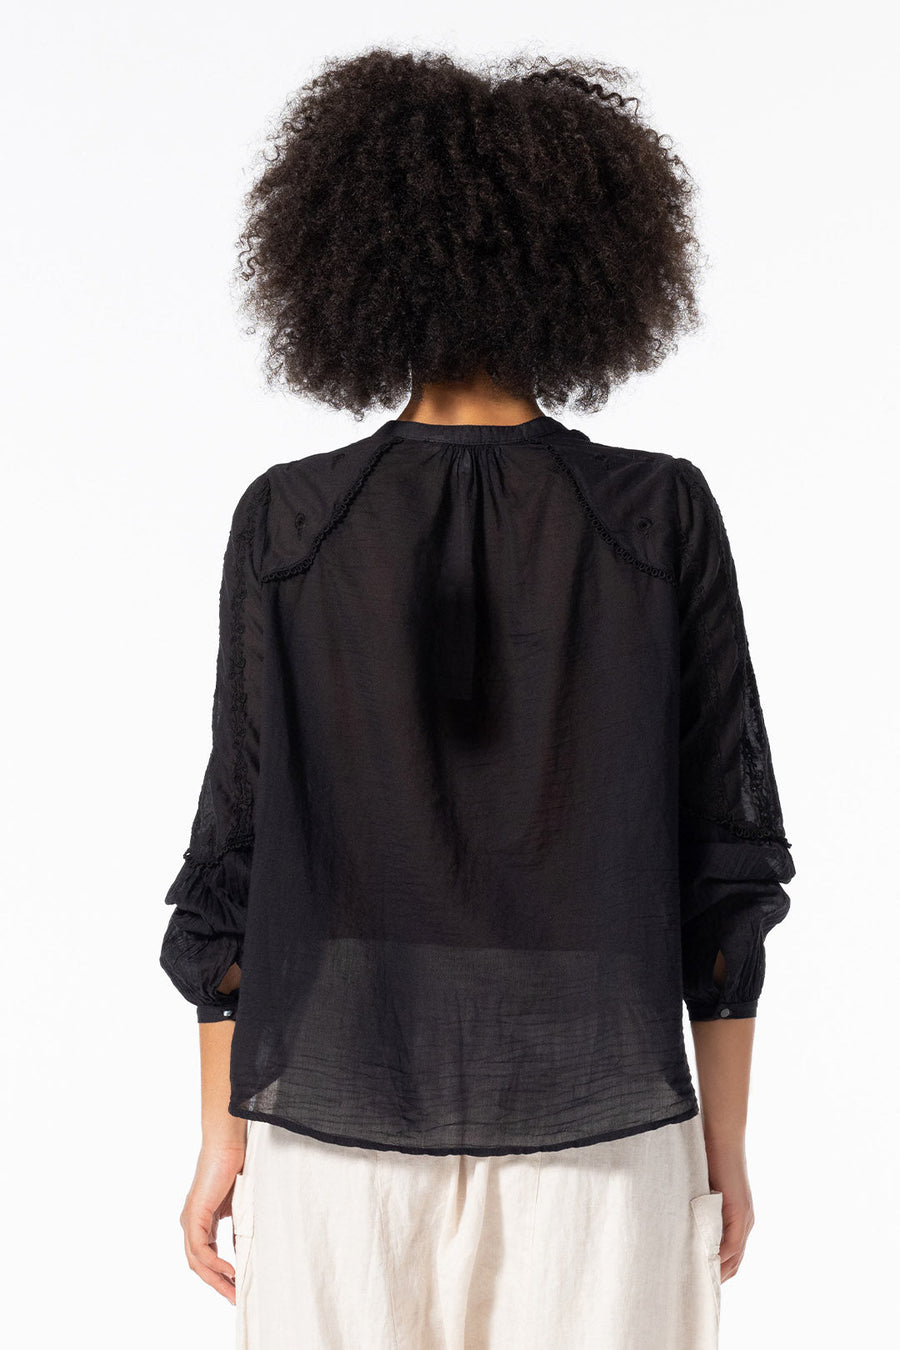 ATHENA LONG SLEEVE TOP, BLACK - Burning Torch Online Boutique